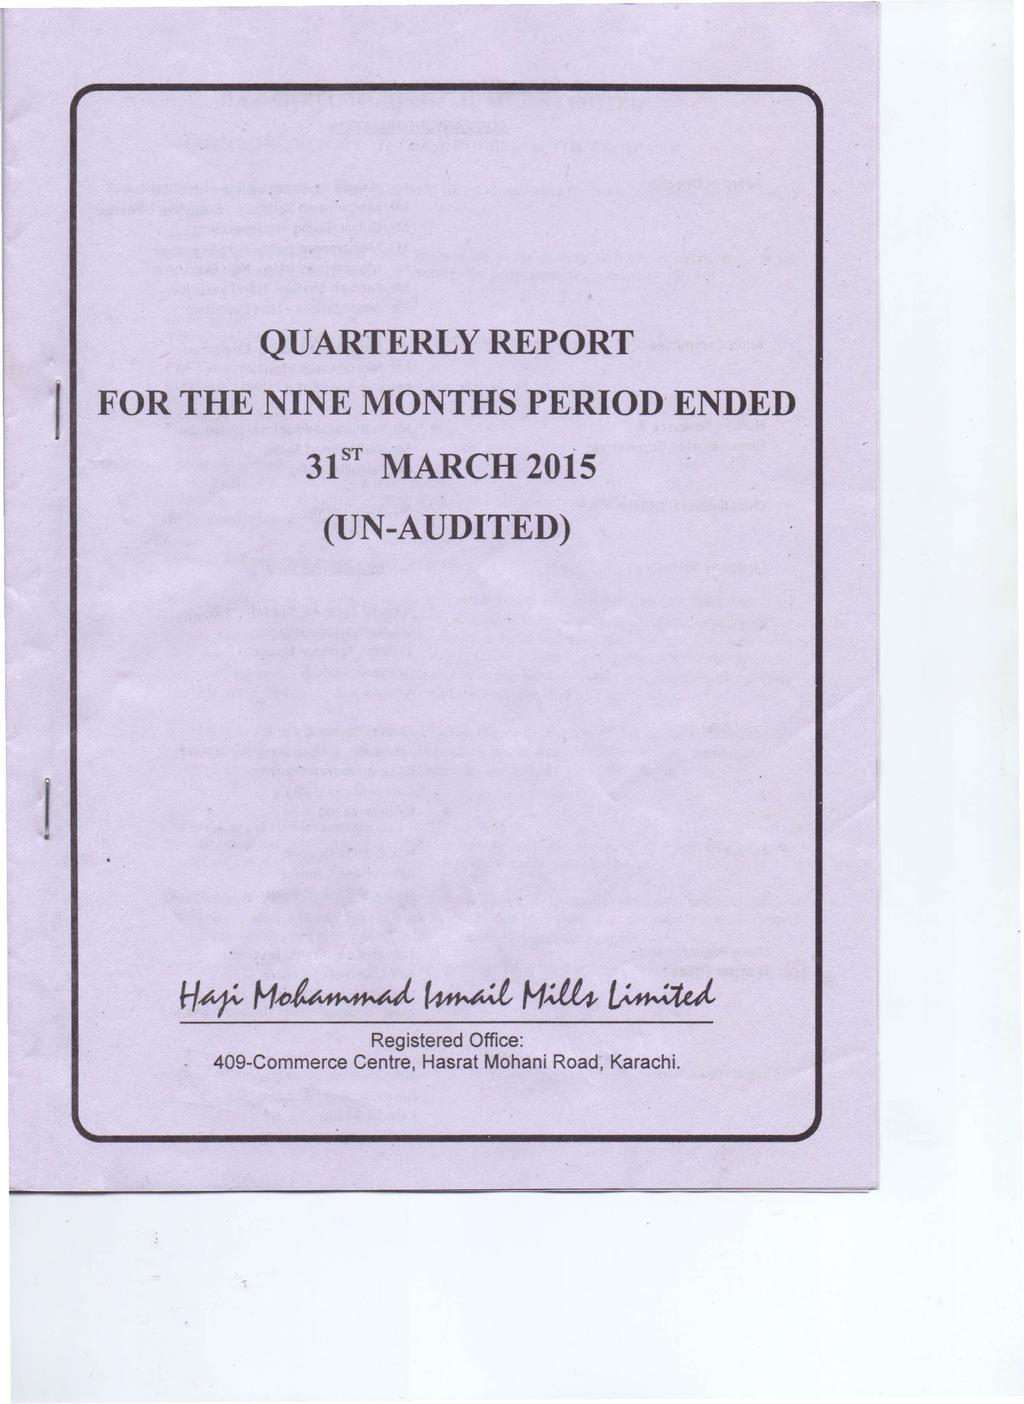 QUARTERLY REPORT FOR THE NINE MONTHS PERIOD' ENDED 31 st MARCH 2015